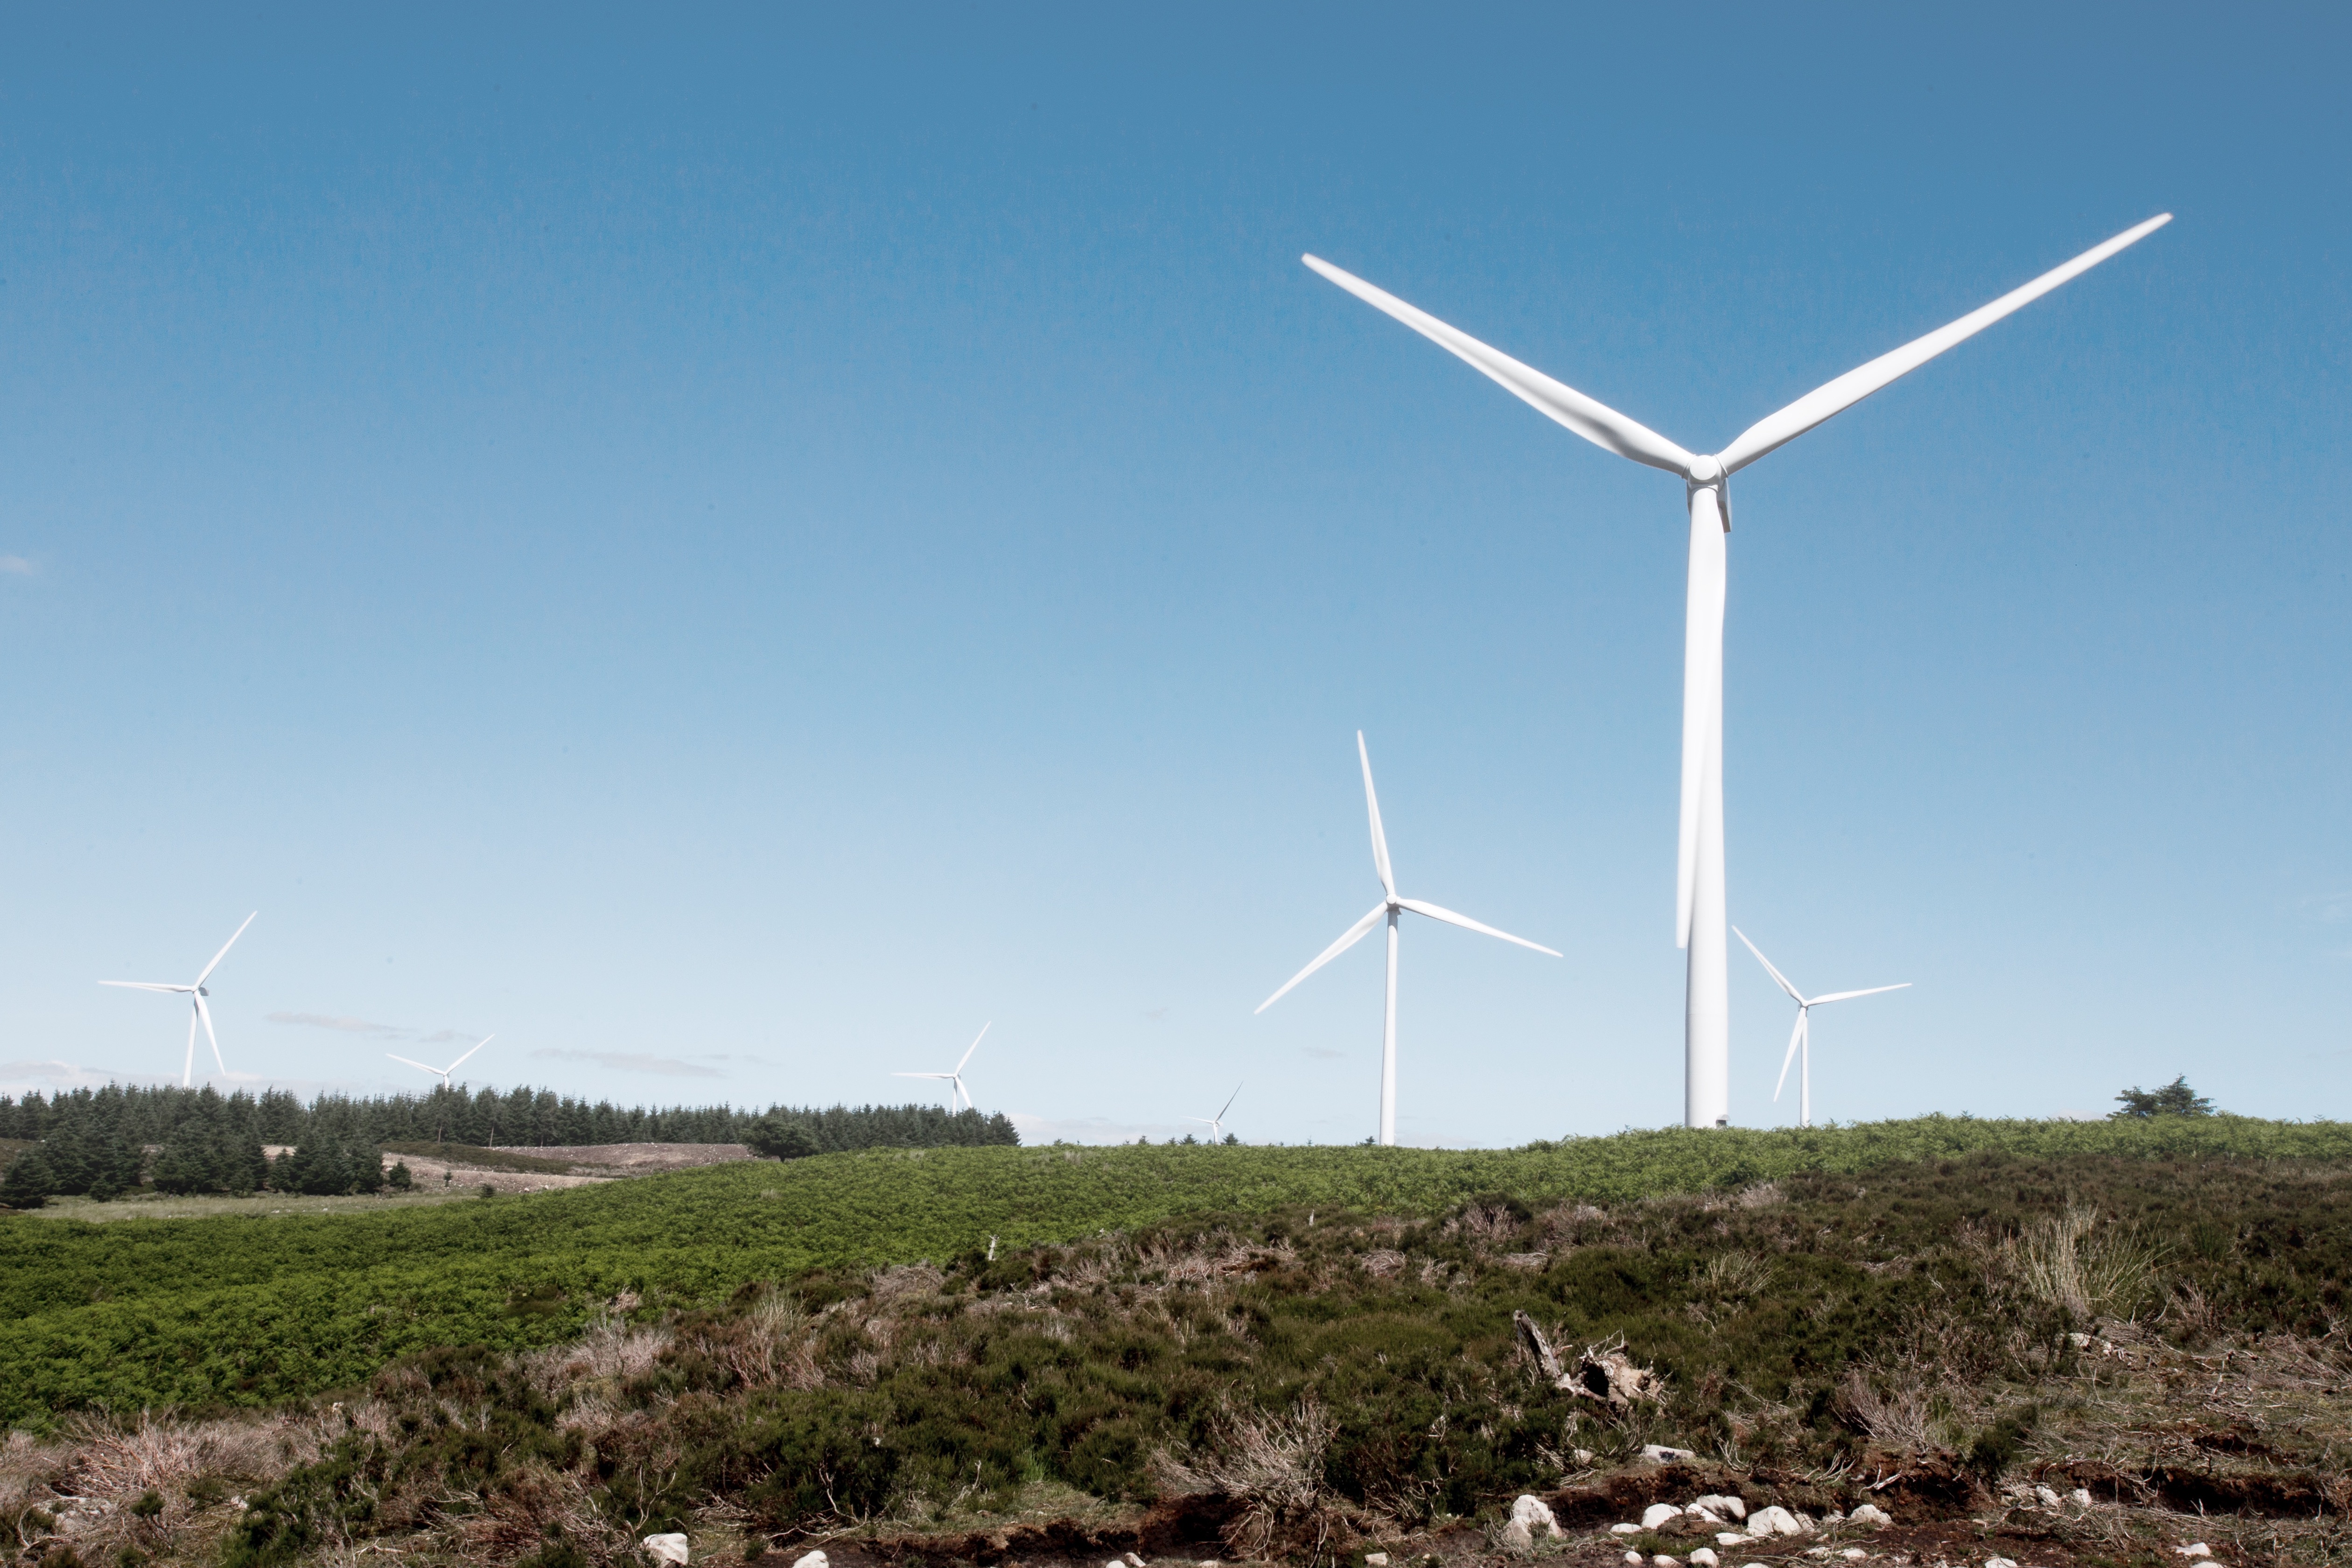 Image of a wind turbine located on a hill, in a green landscape with blue skies above.